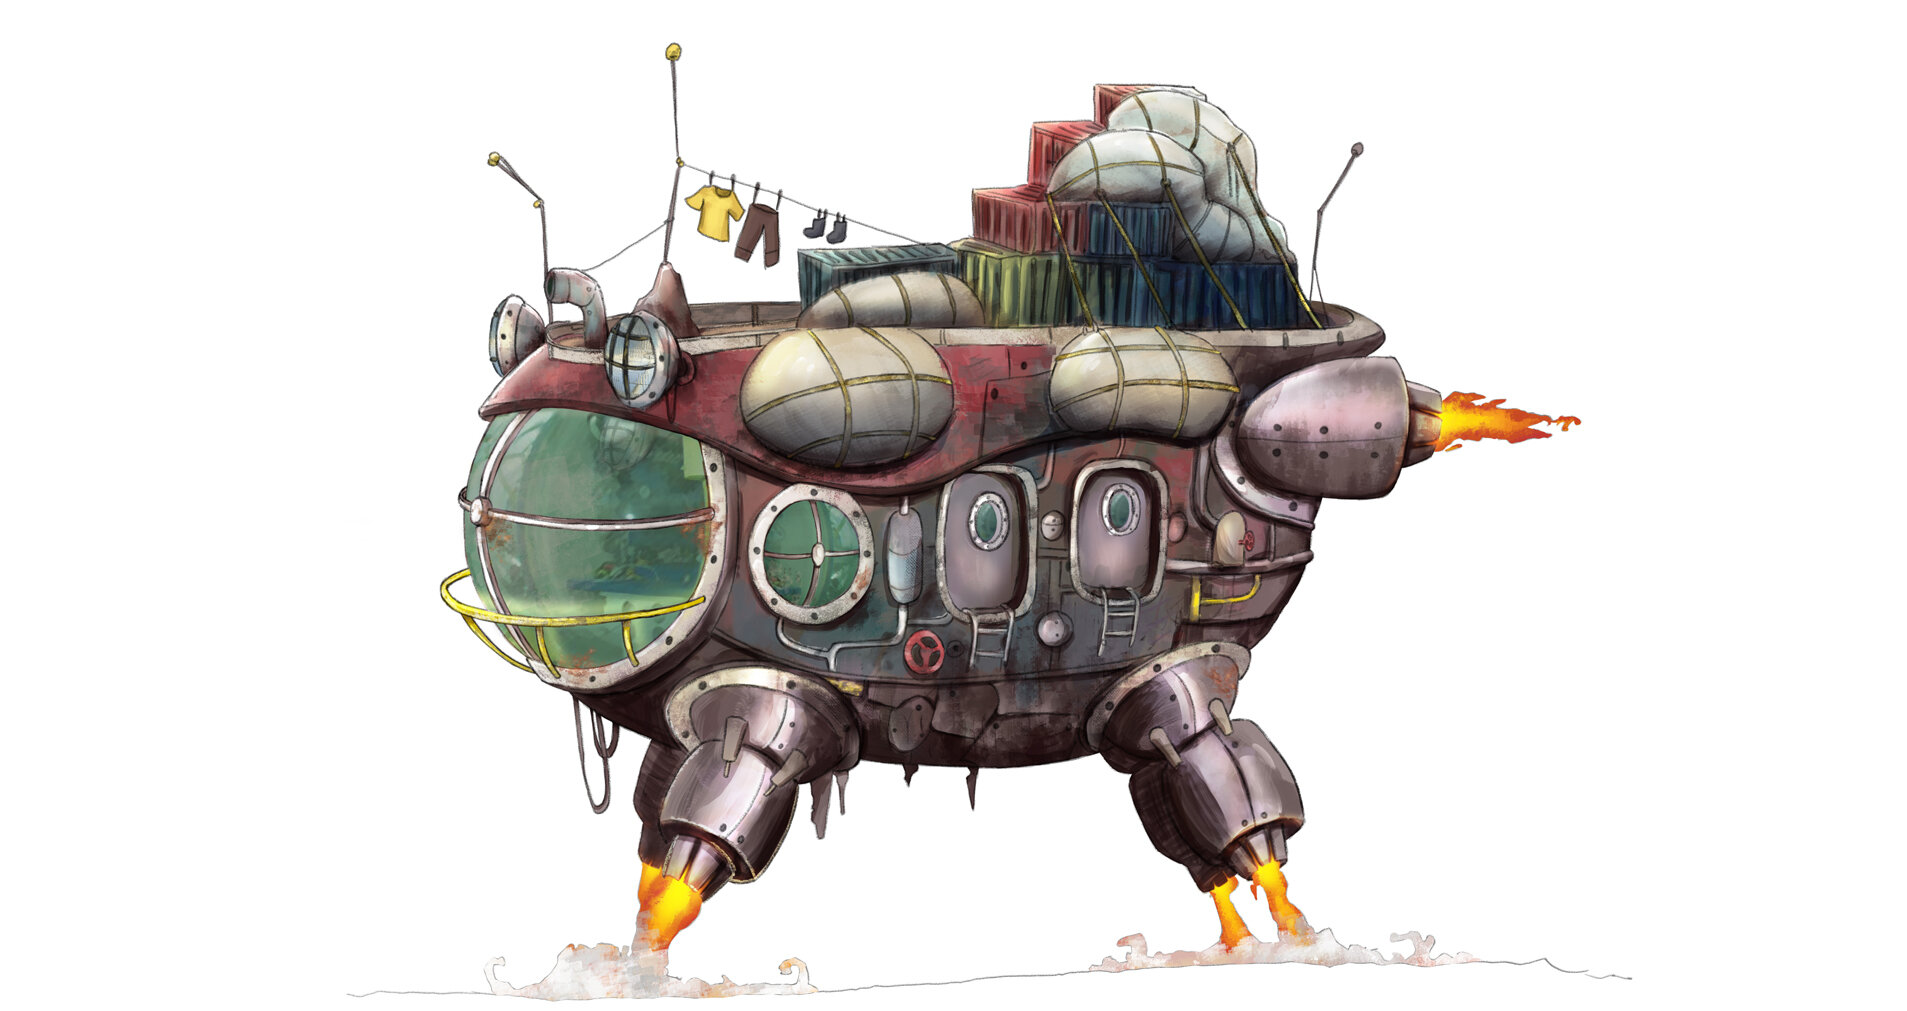  Spaceship concept by Iskander Mos, colored by Mo Lie. 